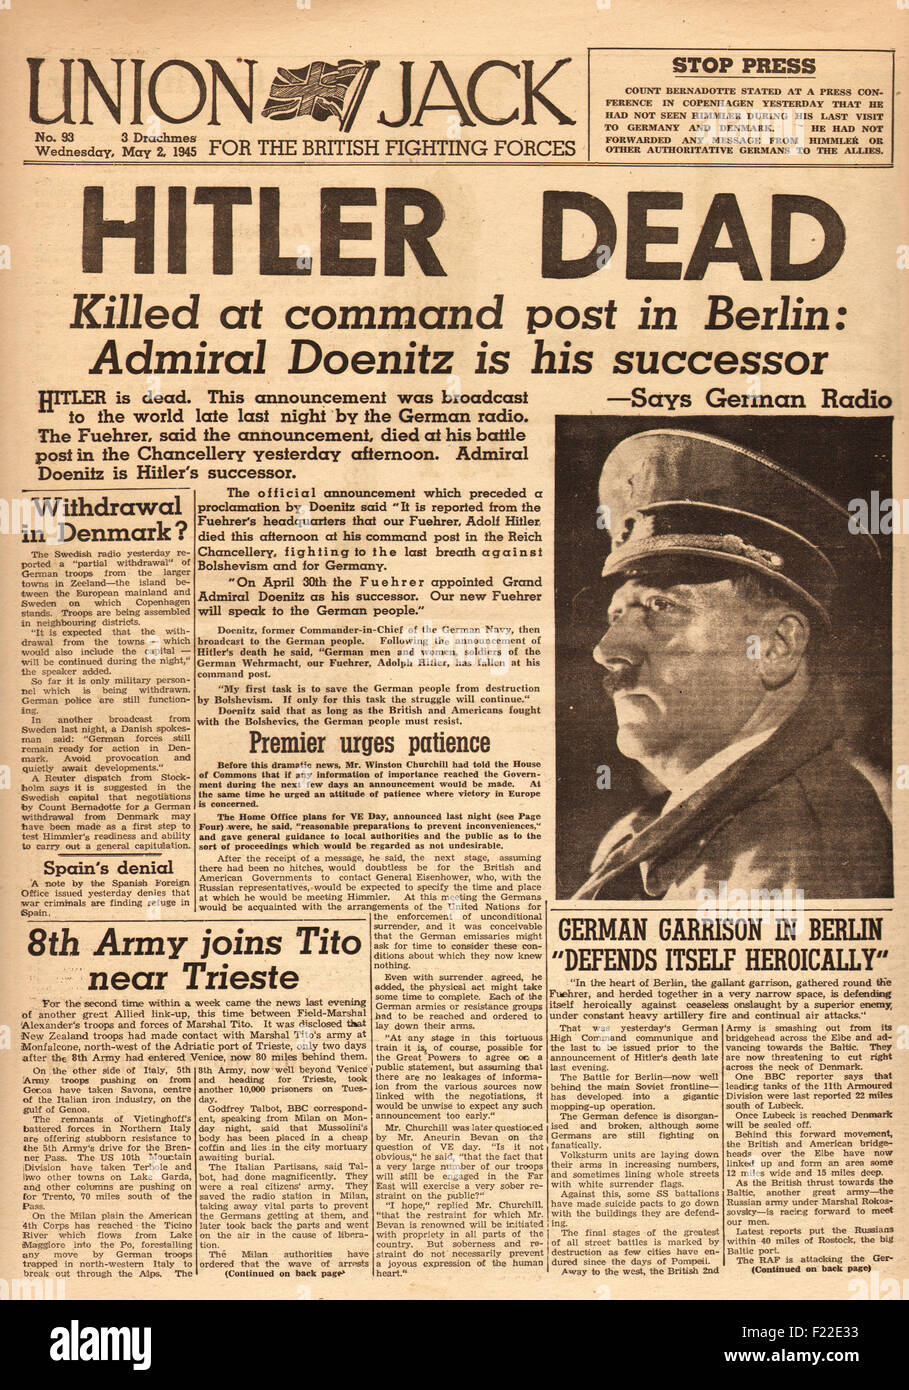 1945 Union Jack (British military newspaper) front page reporting the death of Adolf Hitler Stock Photo